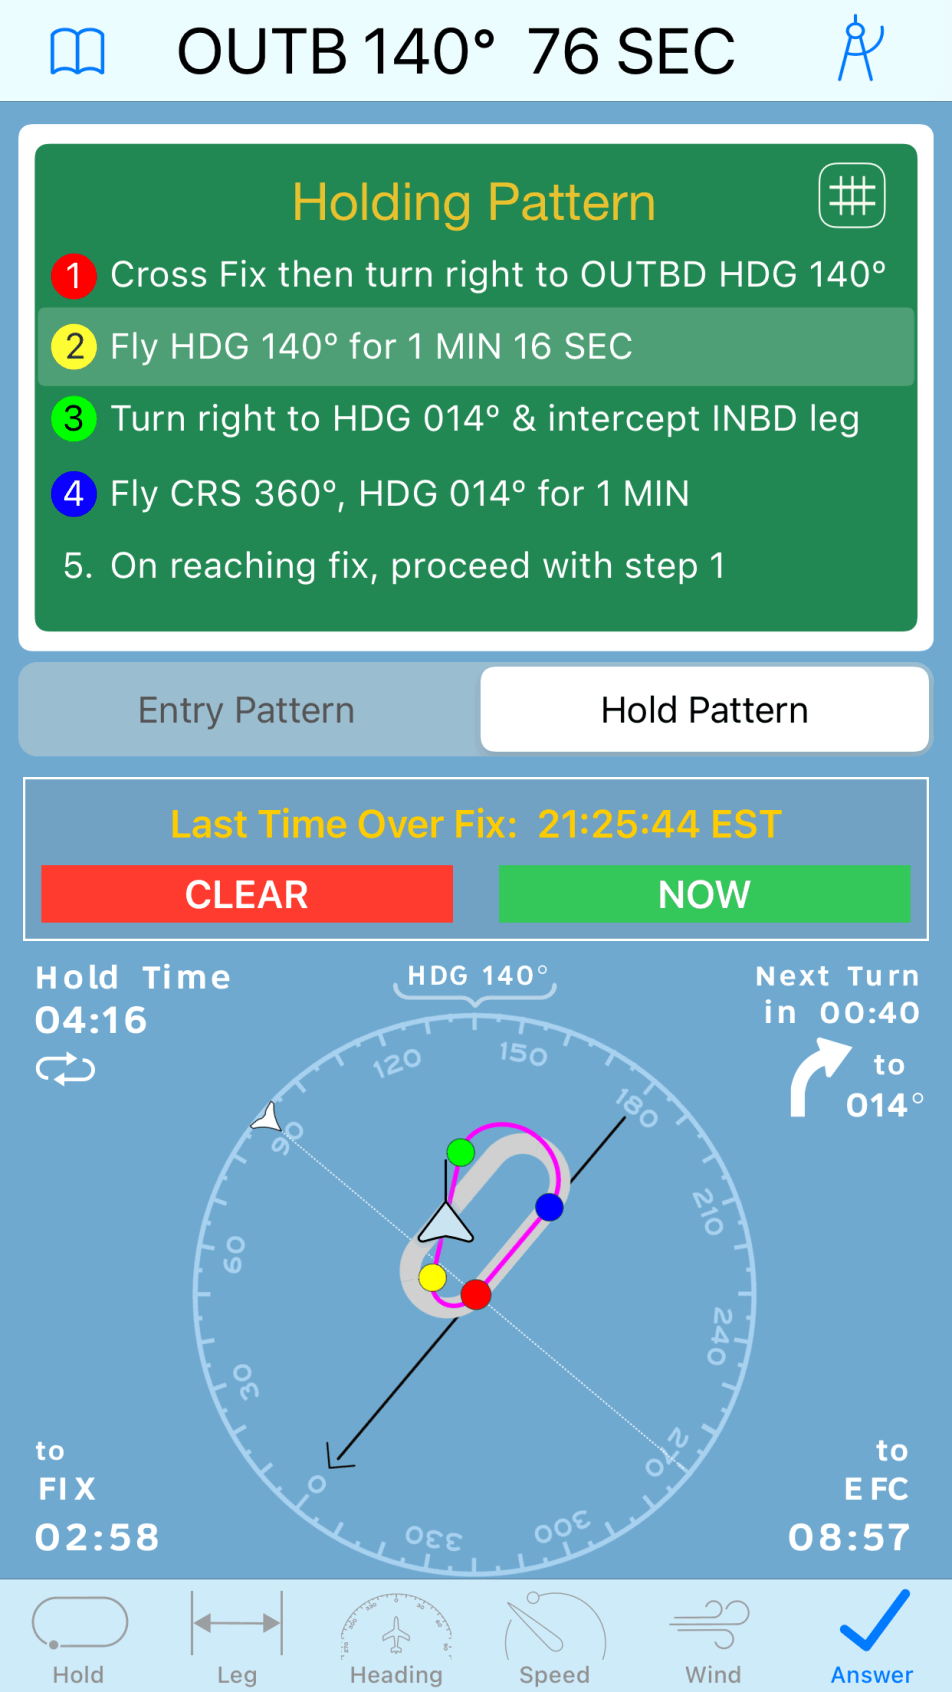 Holding Pattern Computer - Hold Pattern Tab